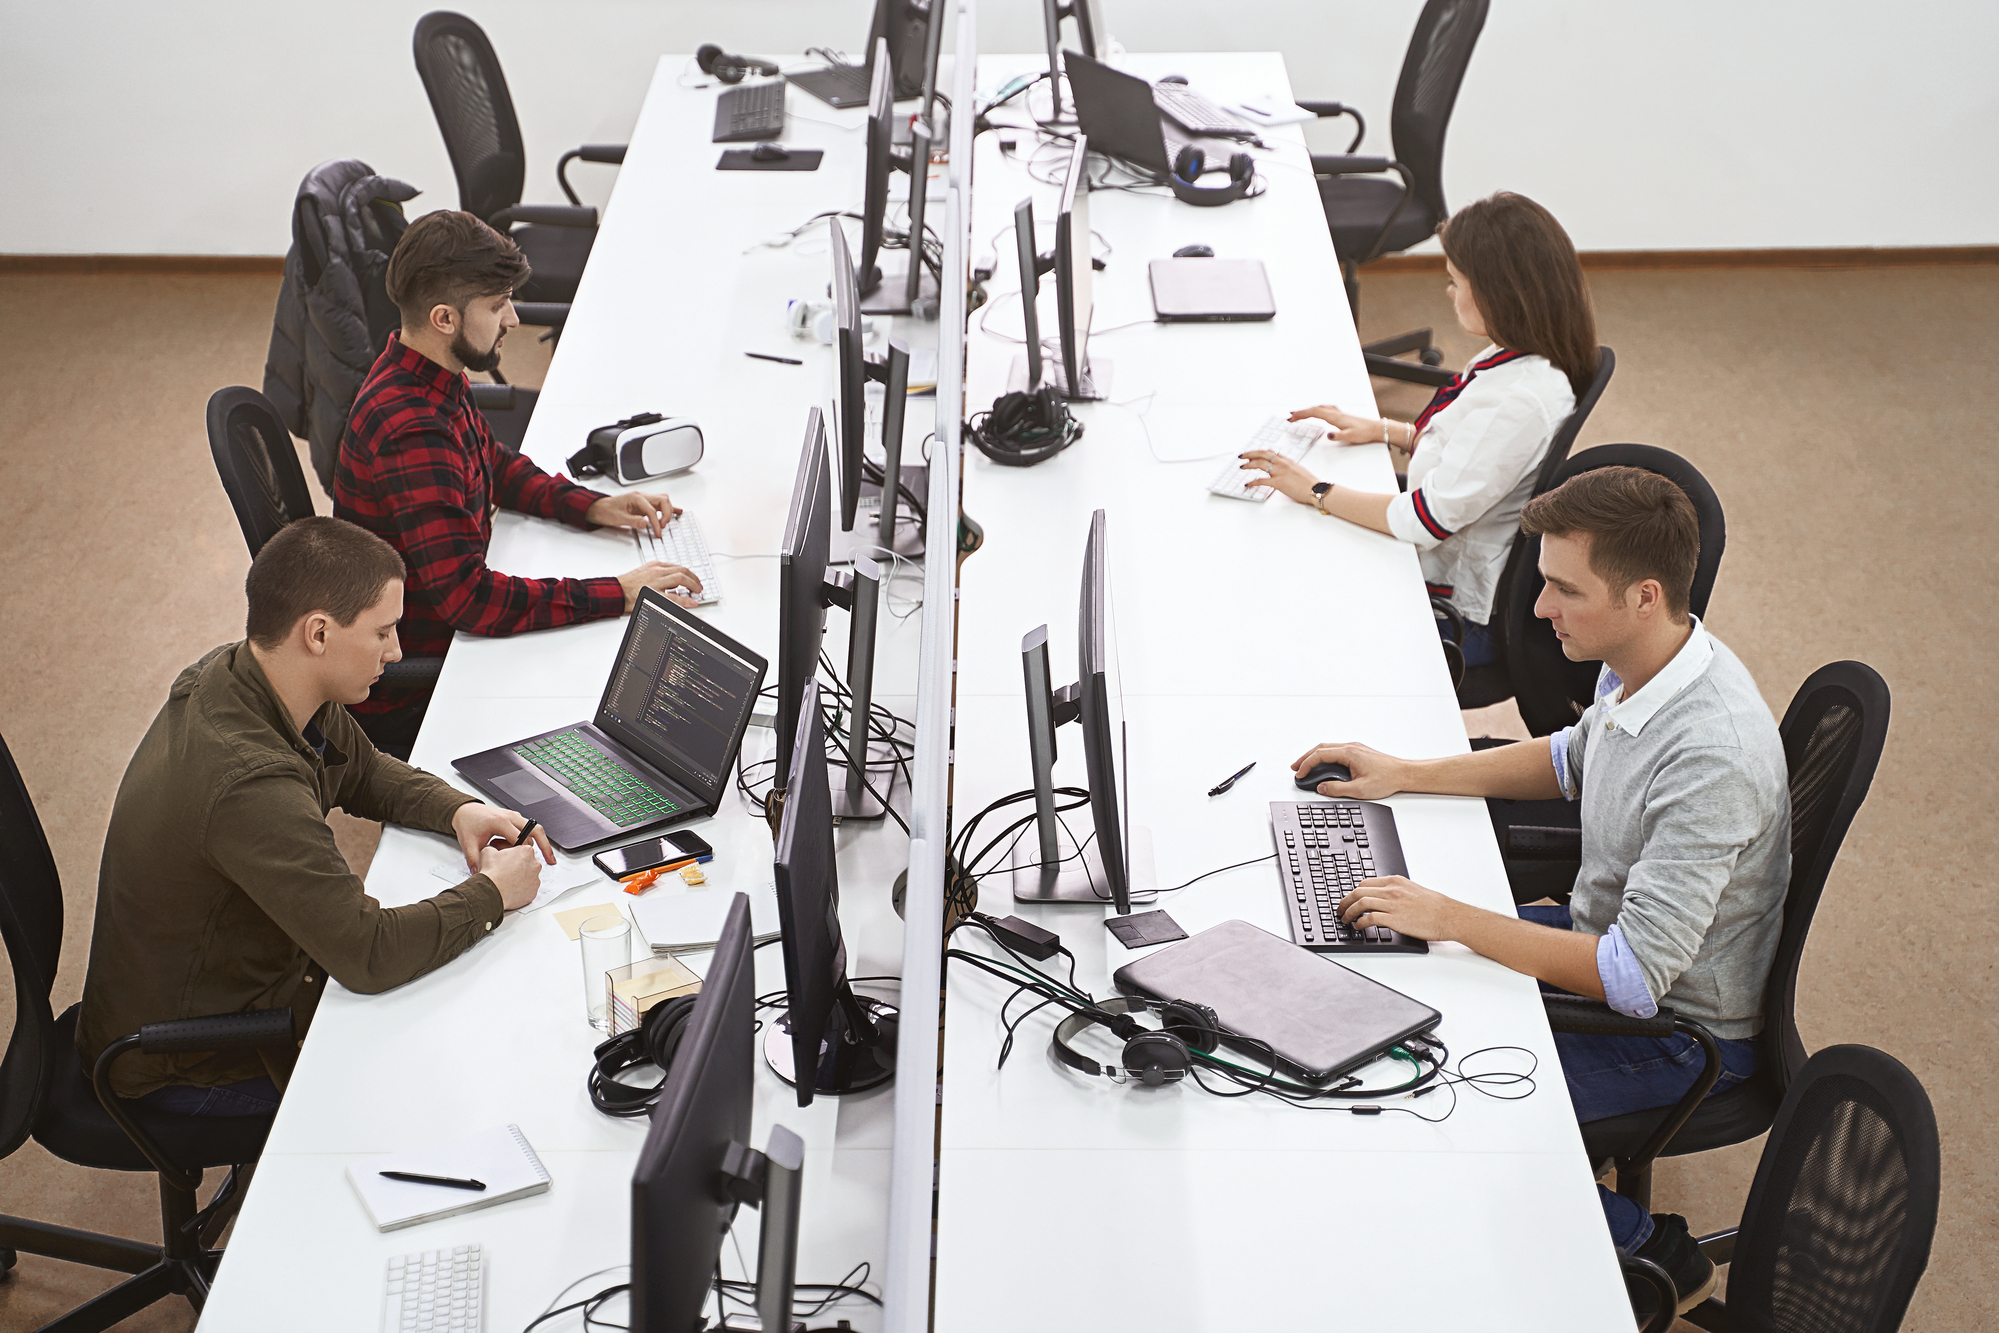 Young professionals working in modern office. Group of developers or programmers sitting at desks focused on desktops and laptops in IT company open space. Team at work. High quality image.